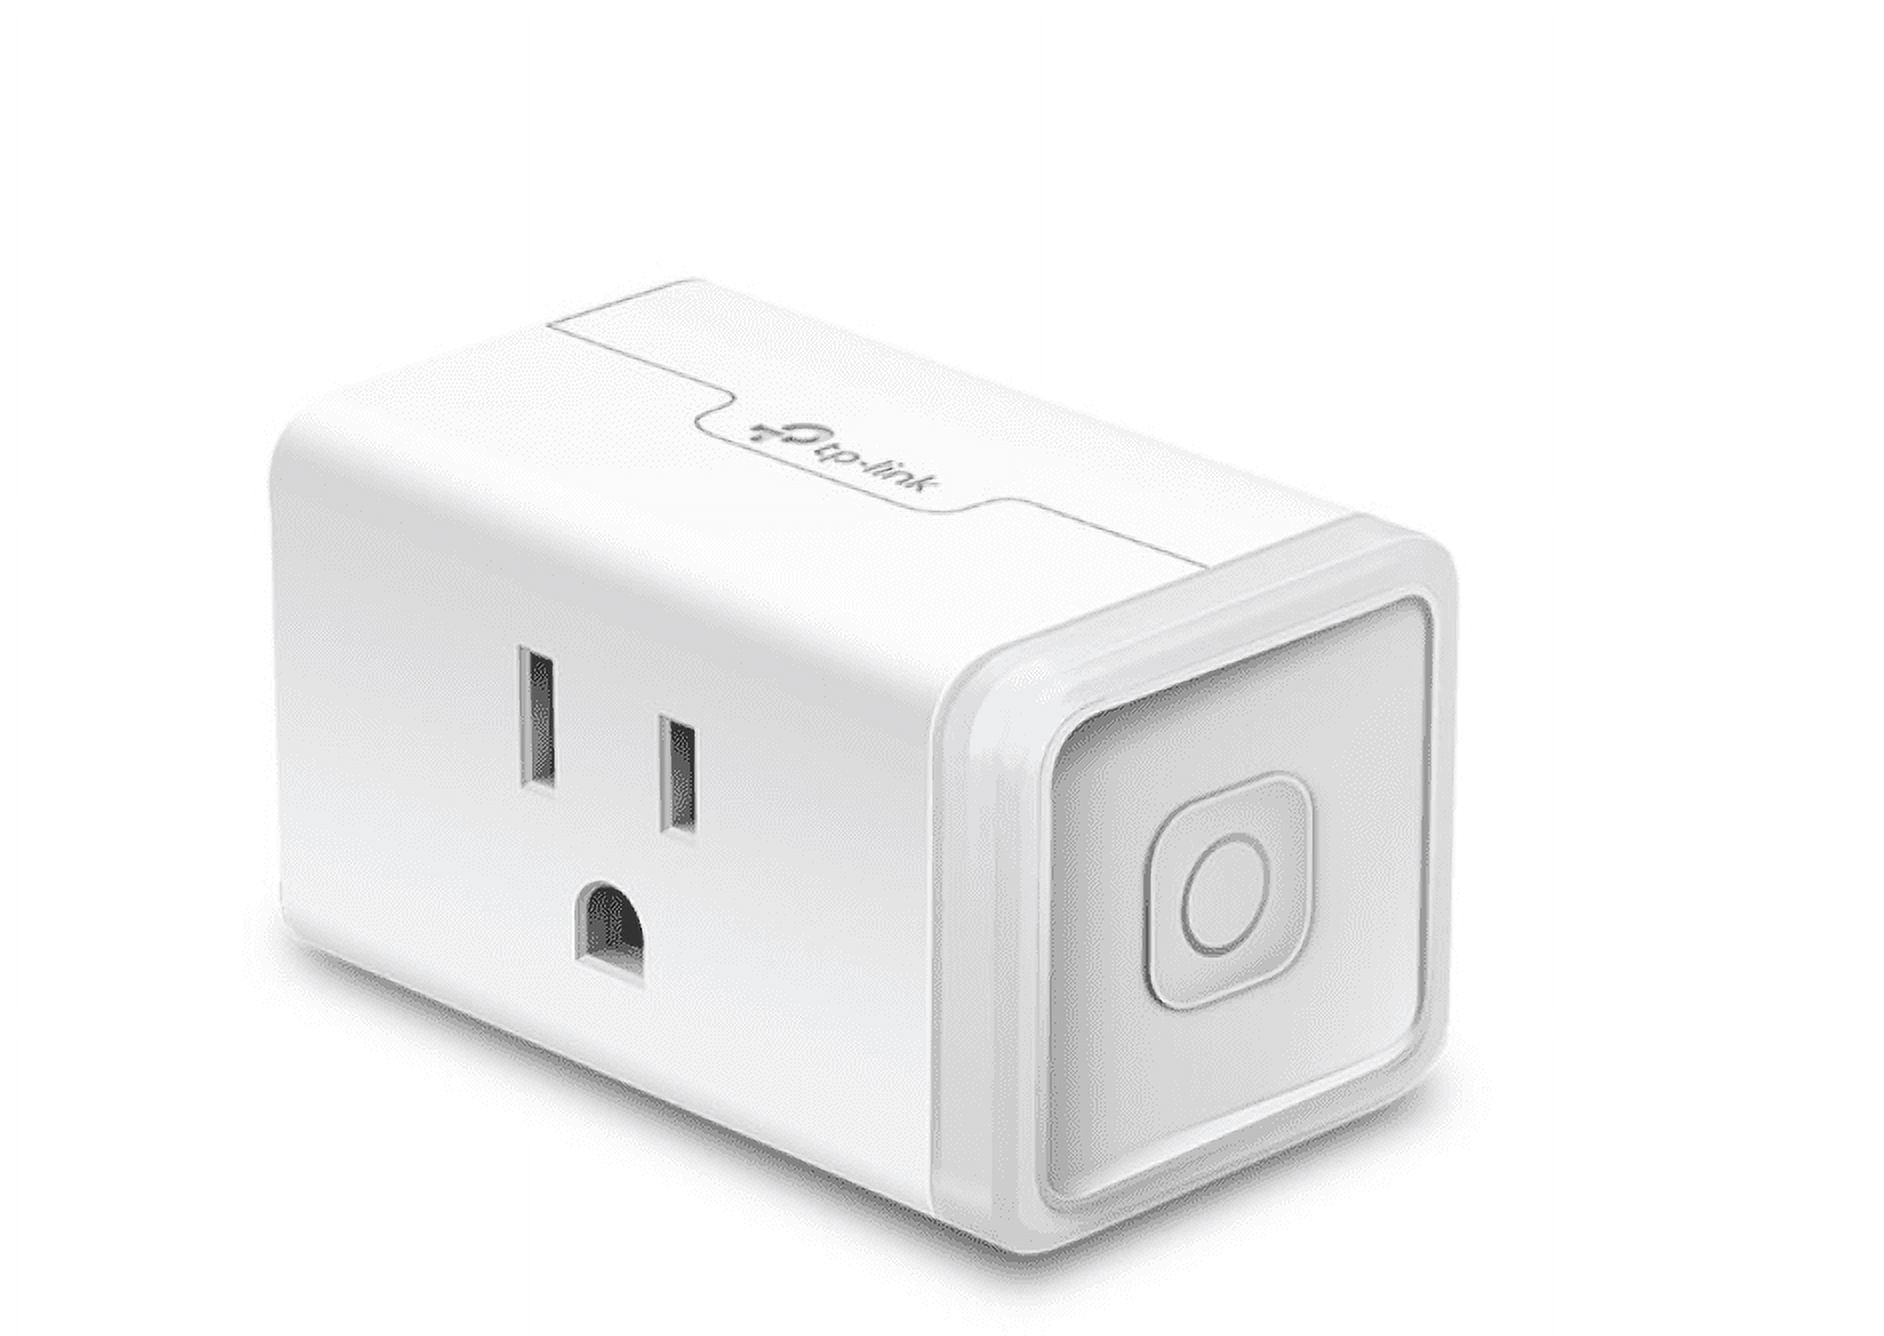 Score a Kasa Smart Plug Mini with Energy Monitoring for $12.99 (or 4 for  $9.80) - IGN